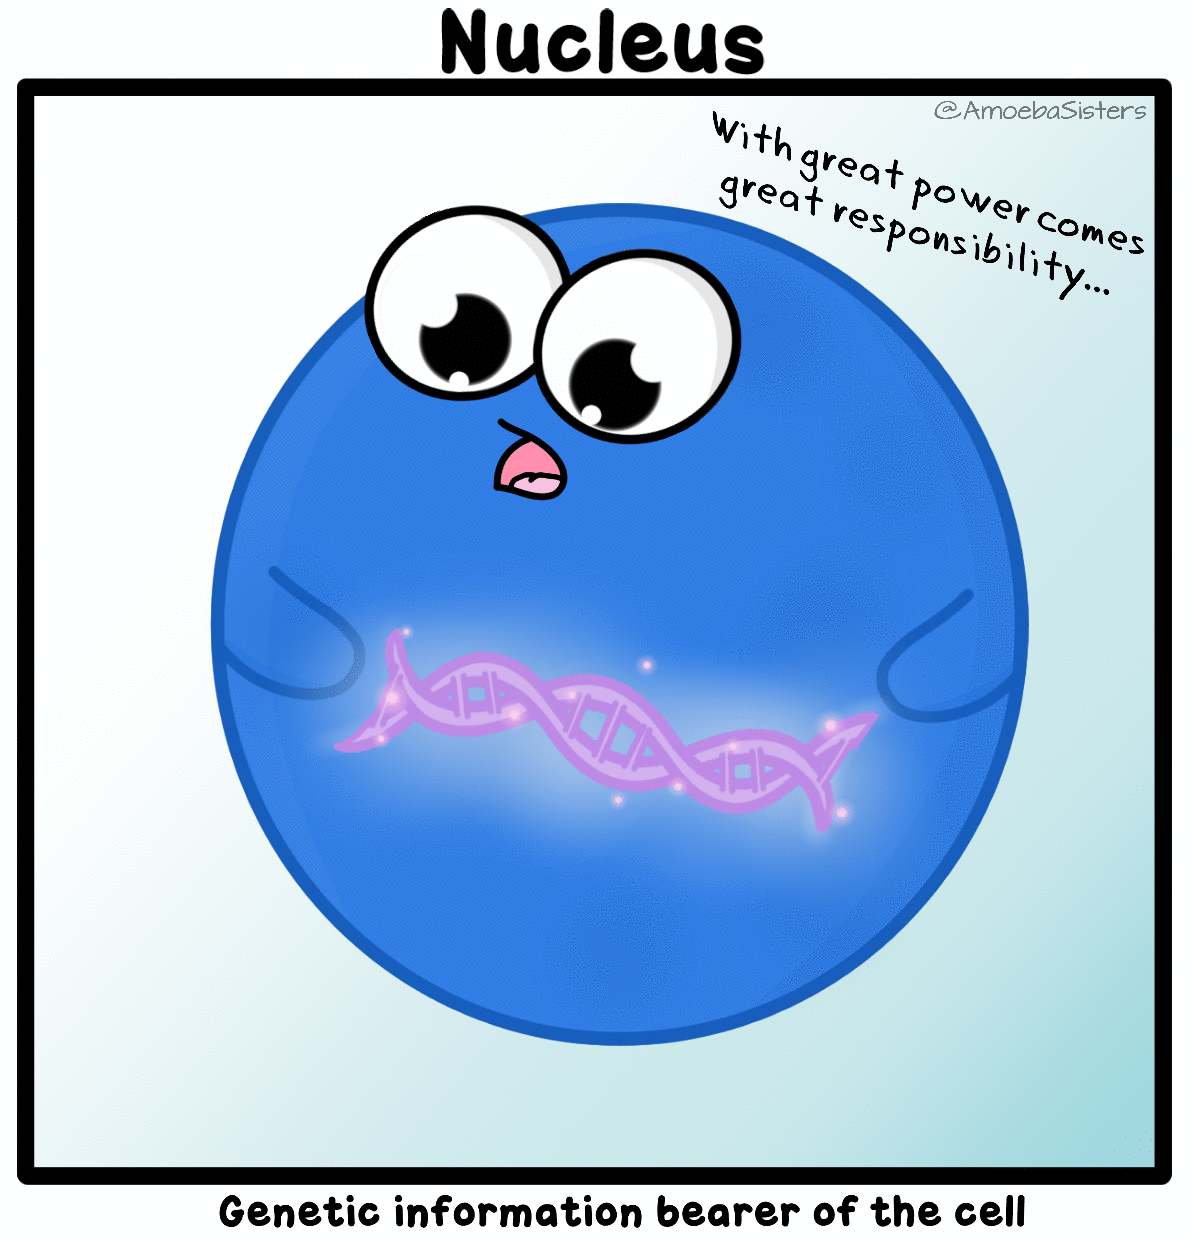 Amoeba sisters gifs science with the to.